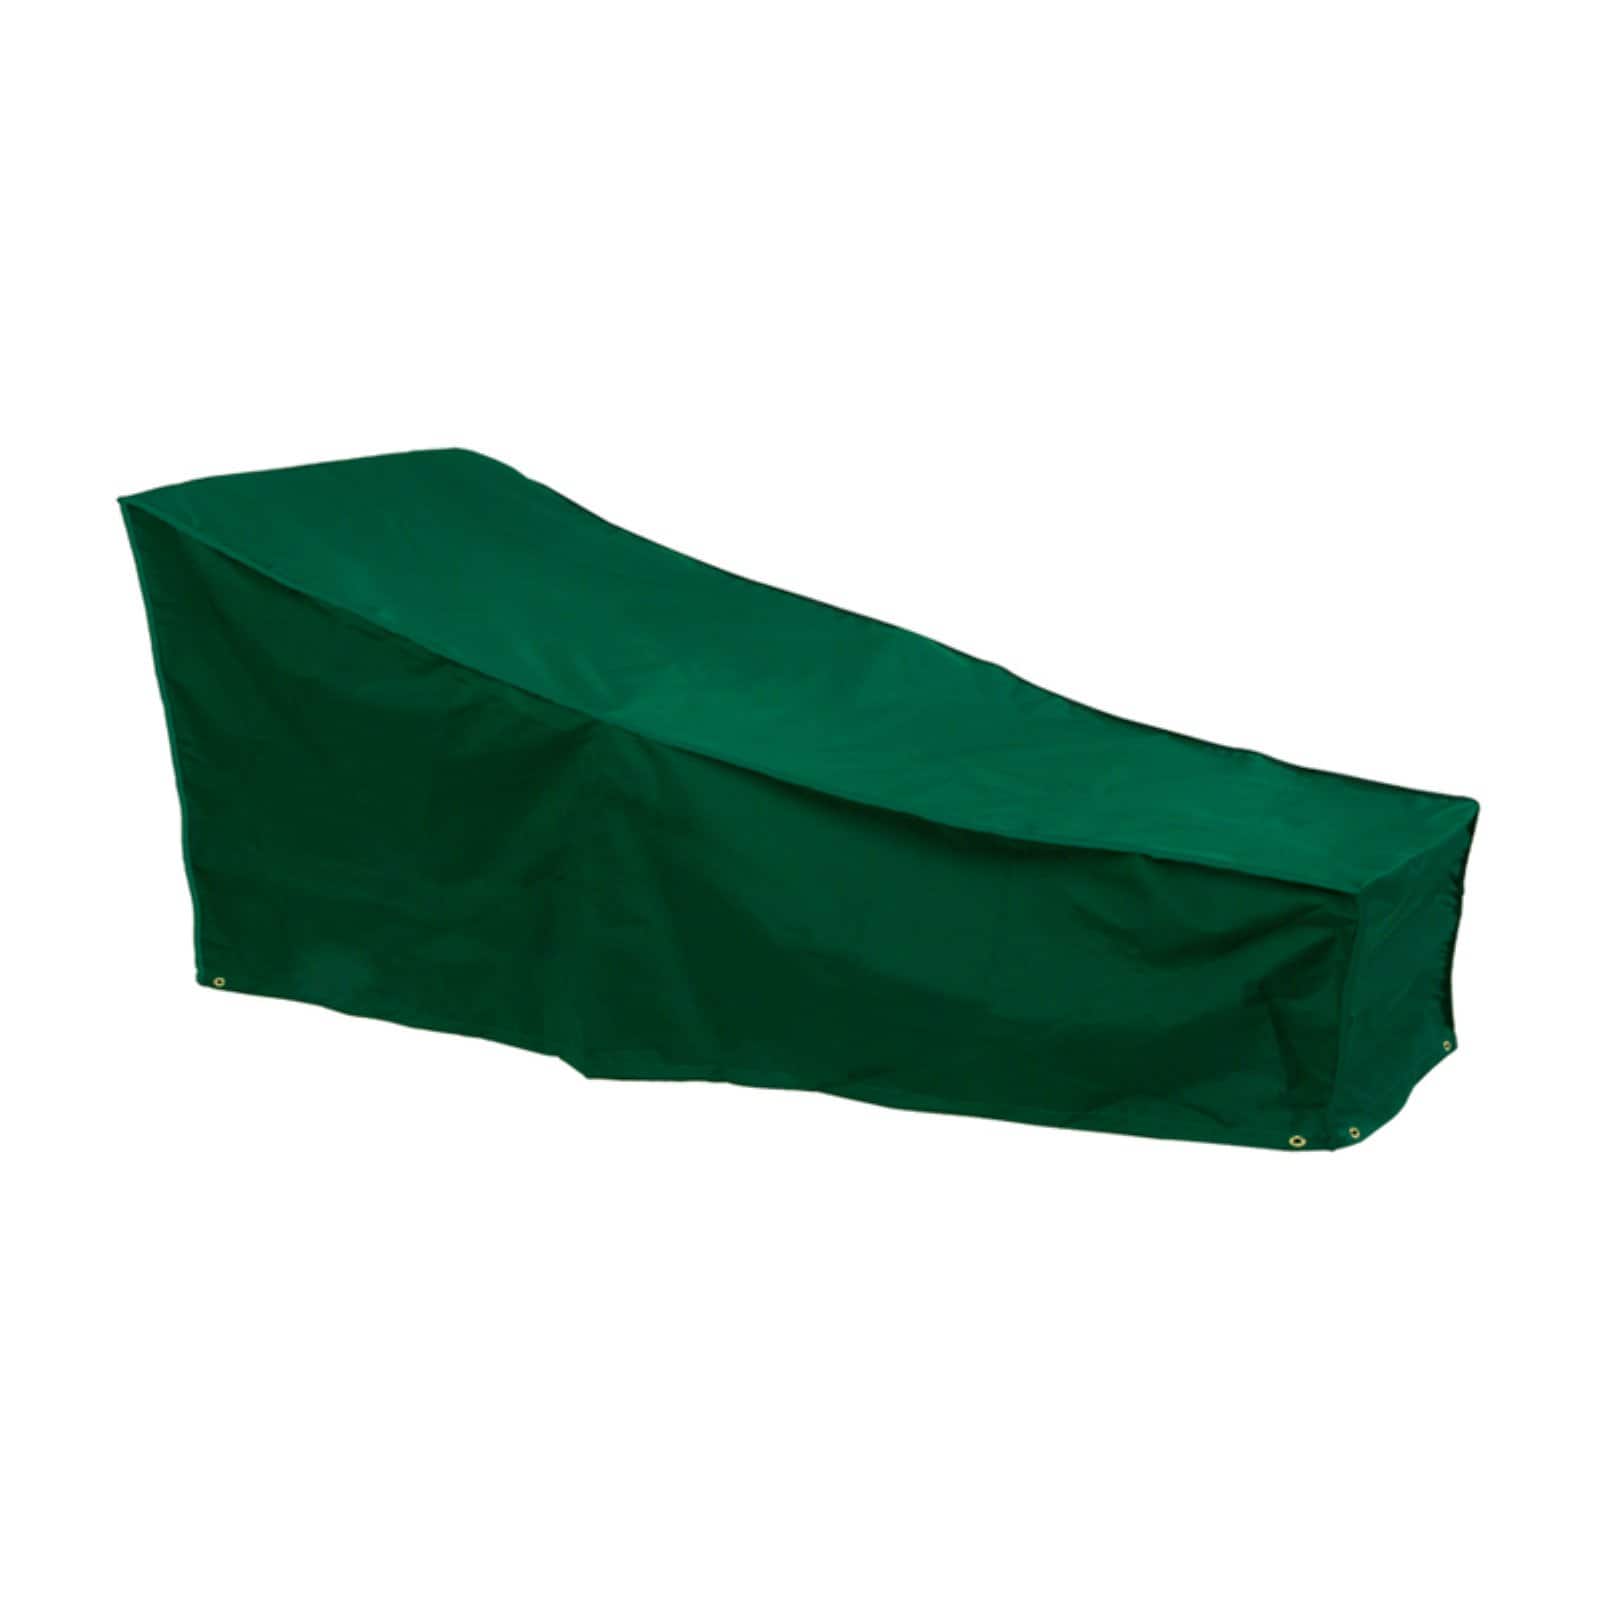 Bosmere C567 Chaise / Steamer Chair Cover - 59 x 24 in. - Green - image 1 of 4